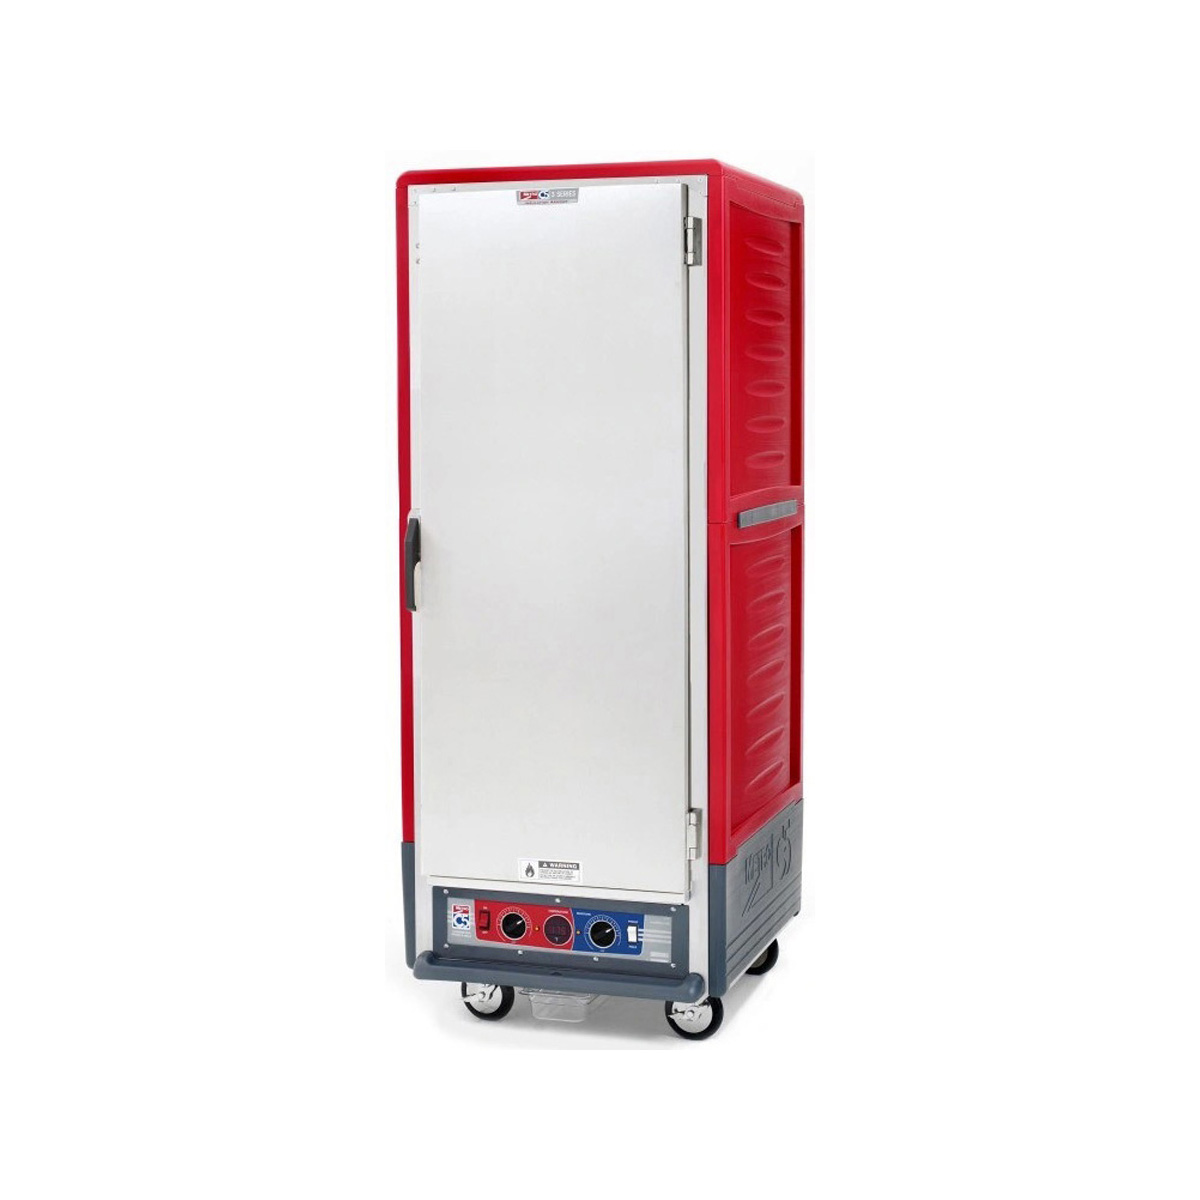 Metro C539-CLFS-4 C5 3 Series Insulated Mobile Proofing and Holding Cabinet